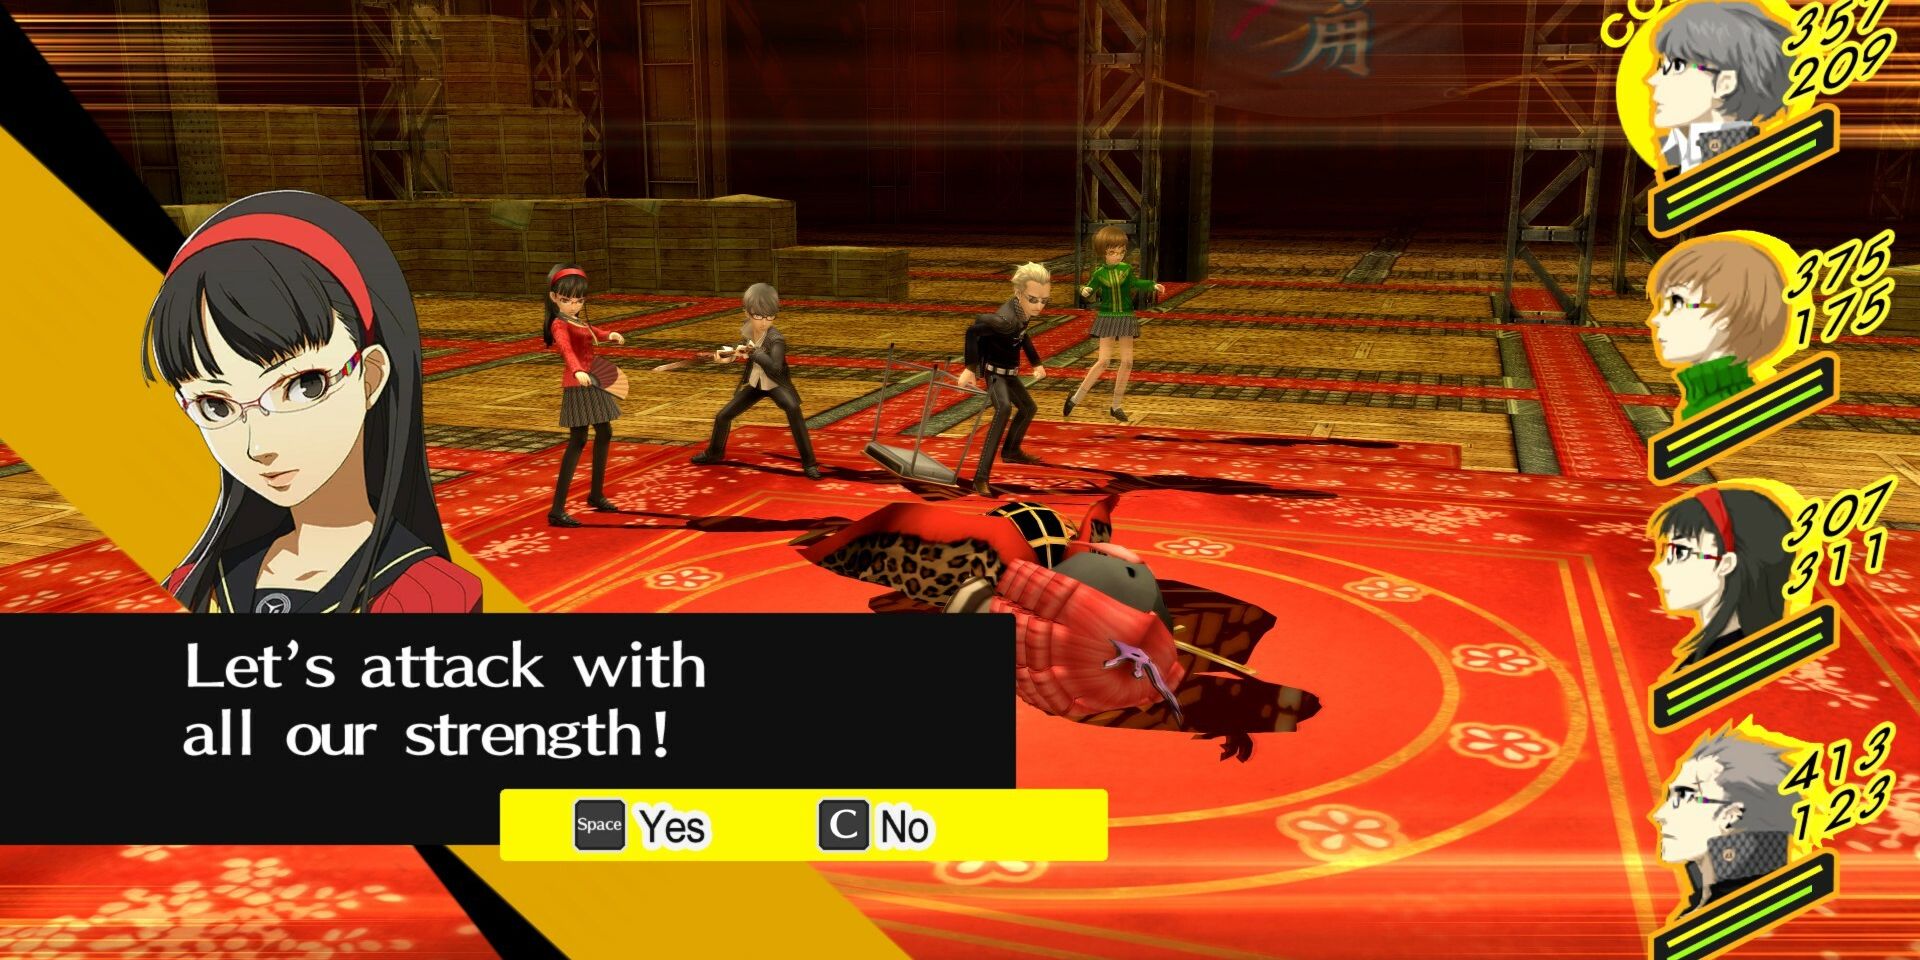 Yukiko asks if it's time for an all out attack in Persona 4 Golden for PC